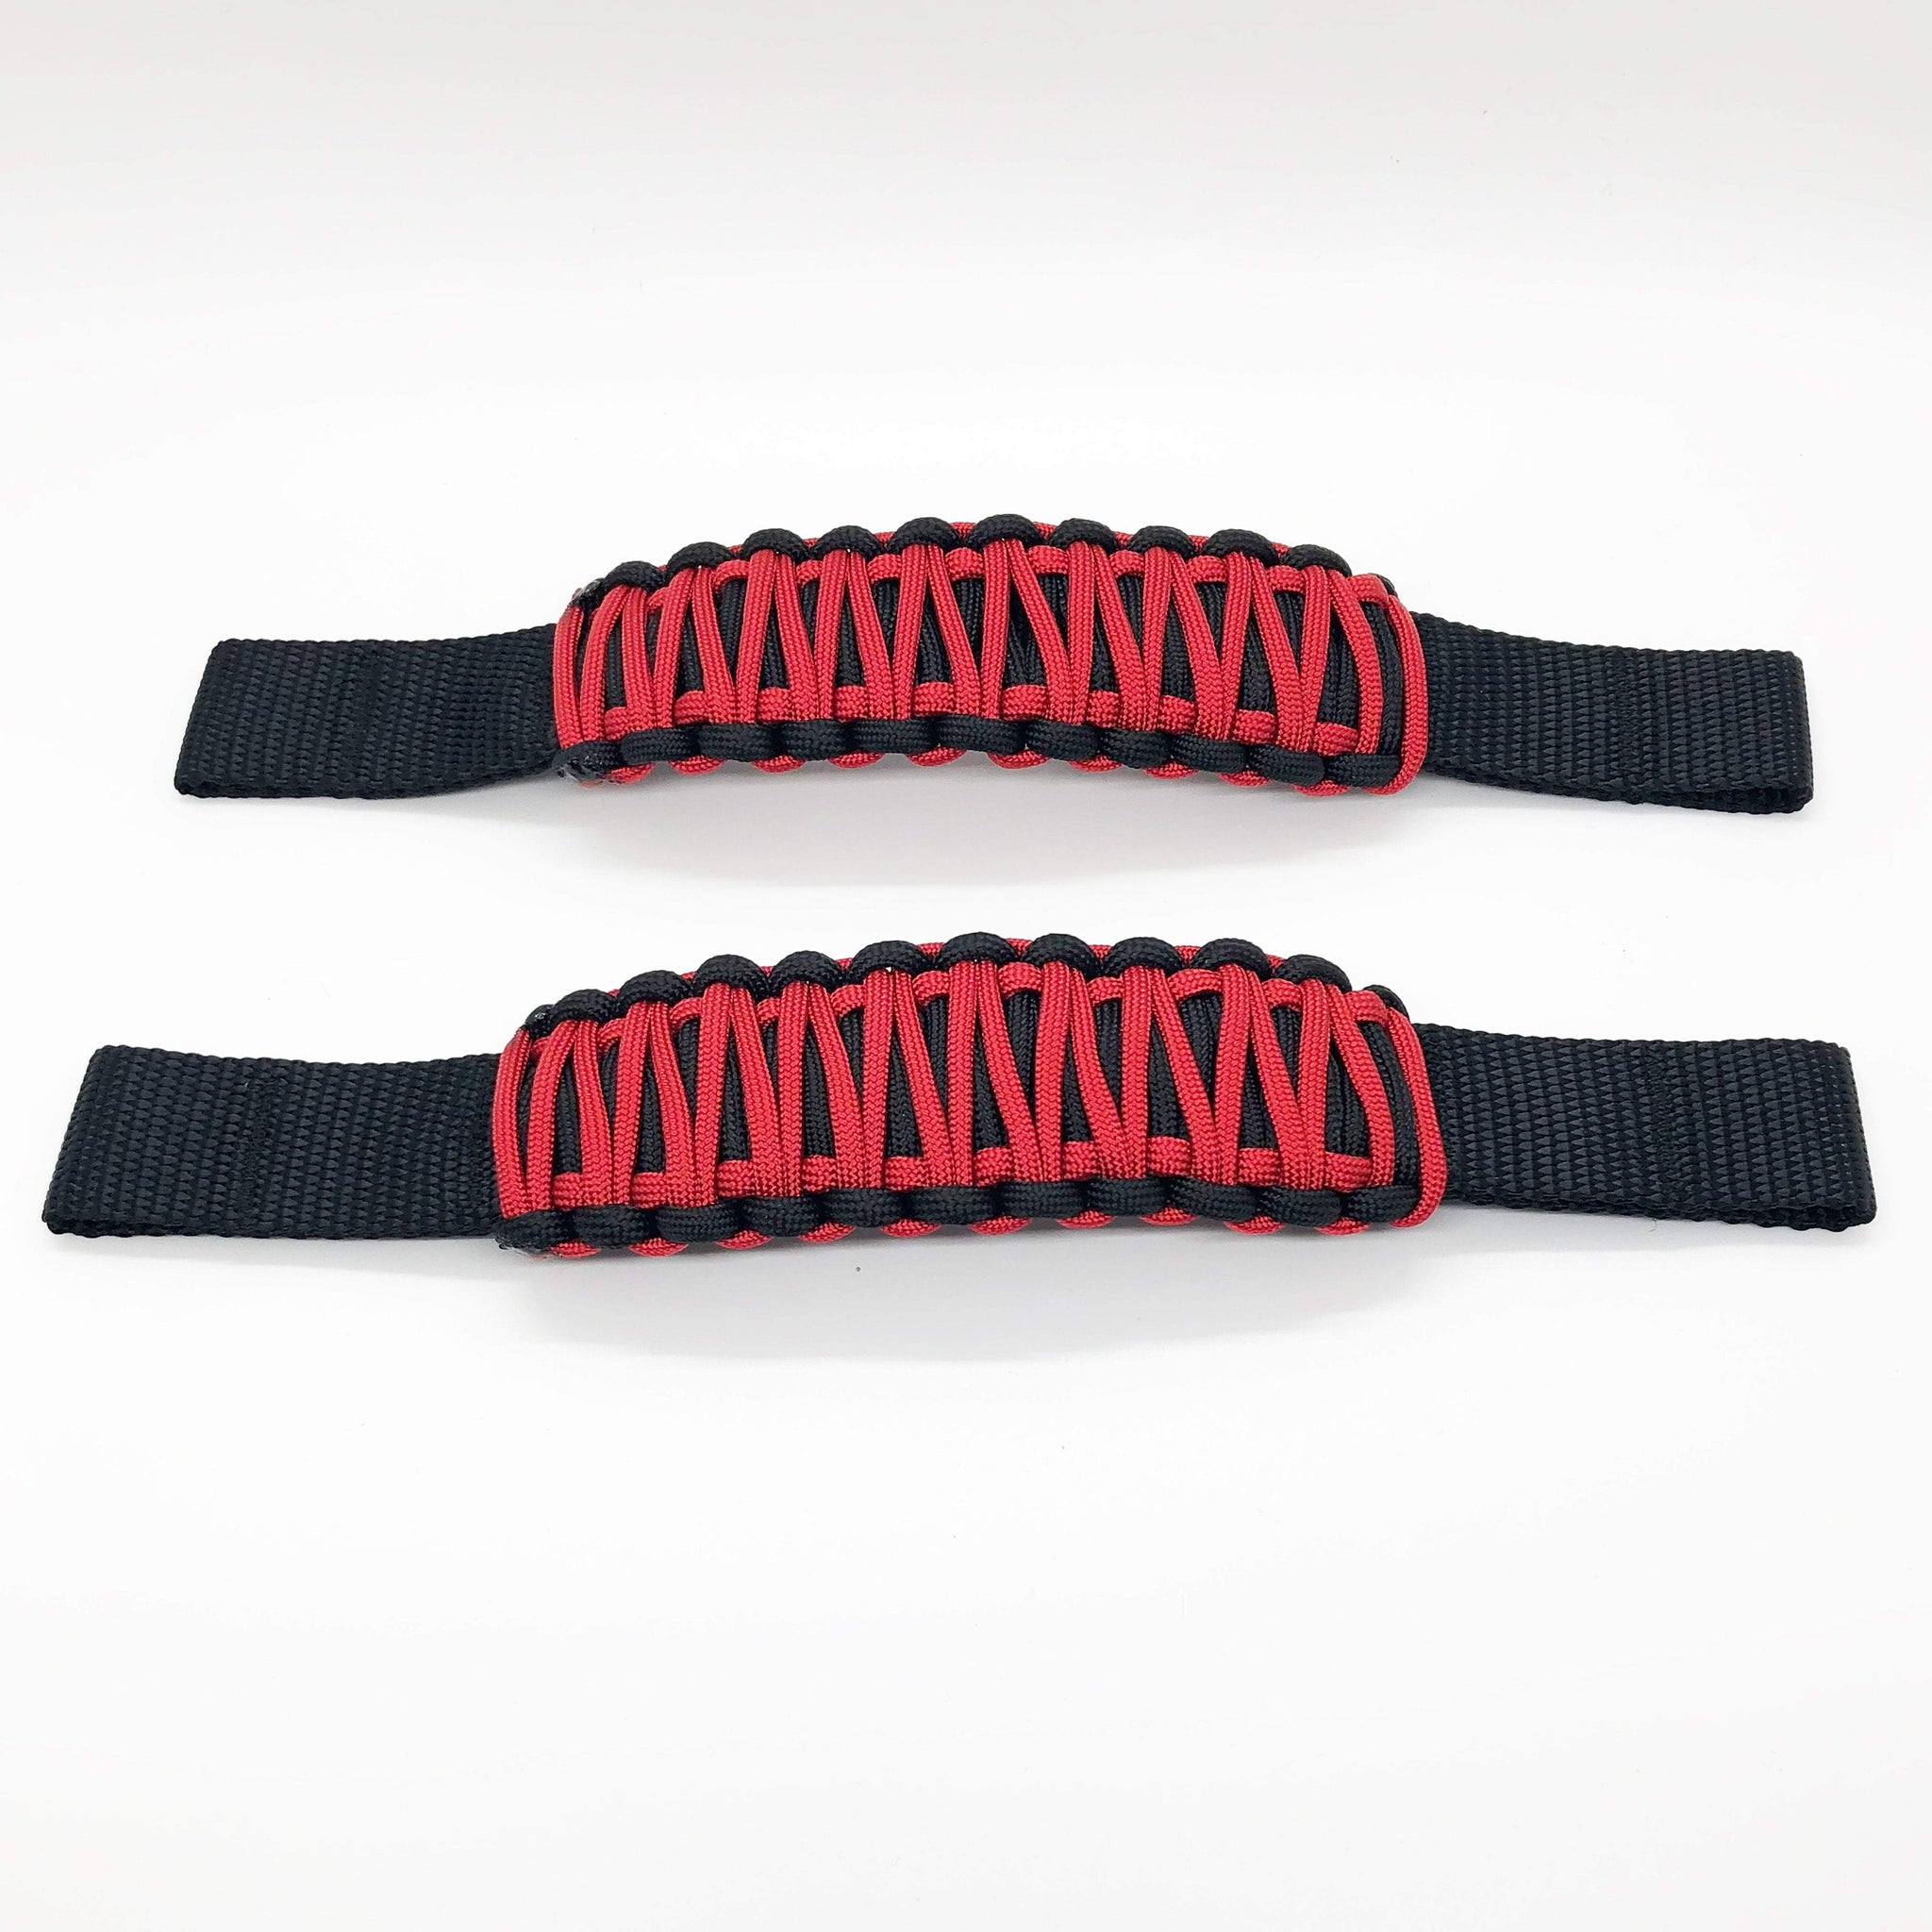 Adjustable Paracord Door Limiting Straps (pair of 2) for 1976-06